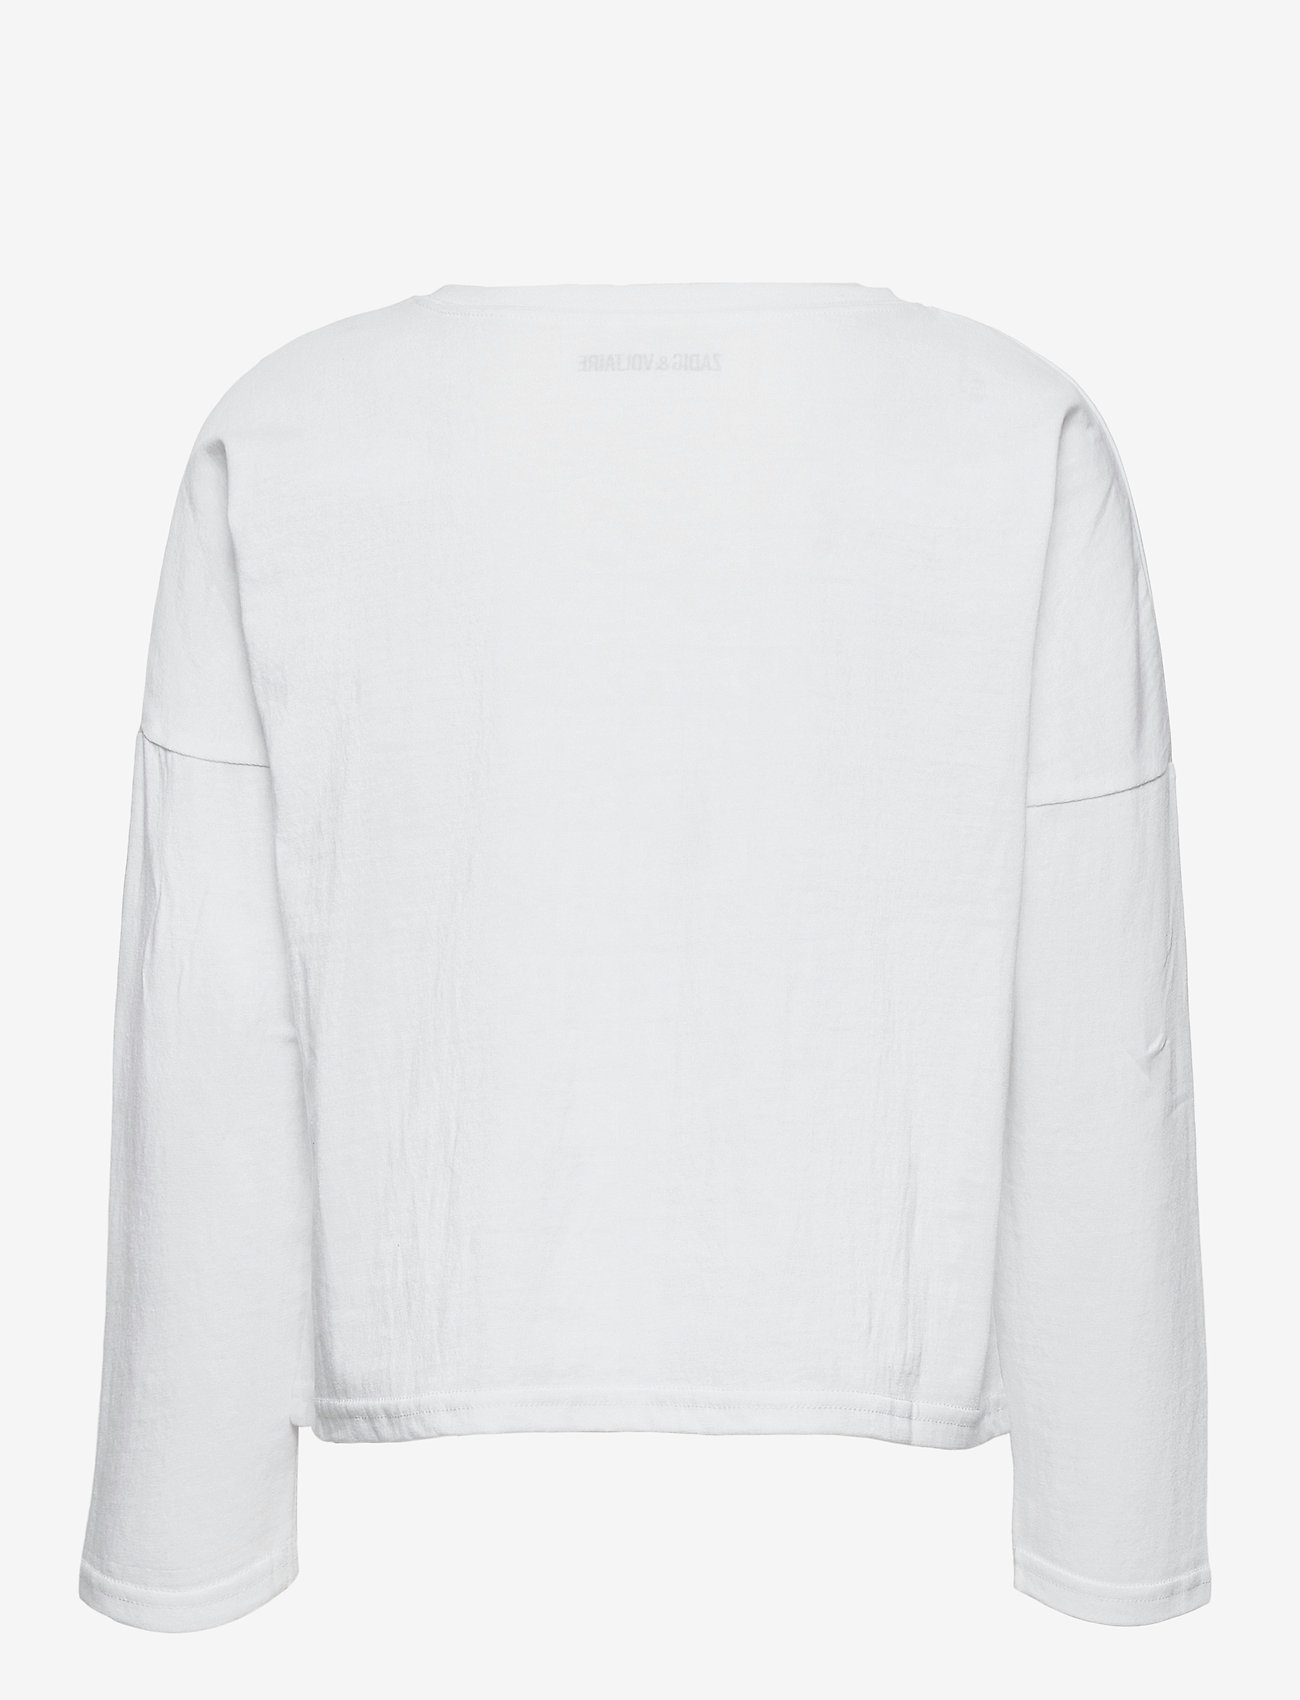 Zadig & Voltaire Kids - LONG SLEEVE T-SHIRT - white - 1